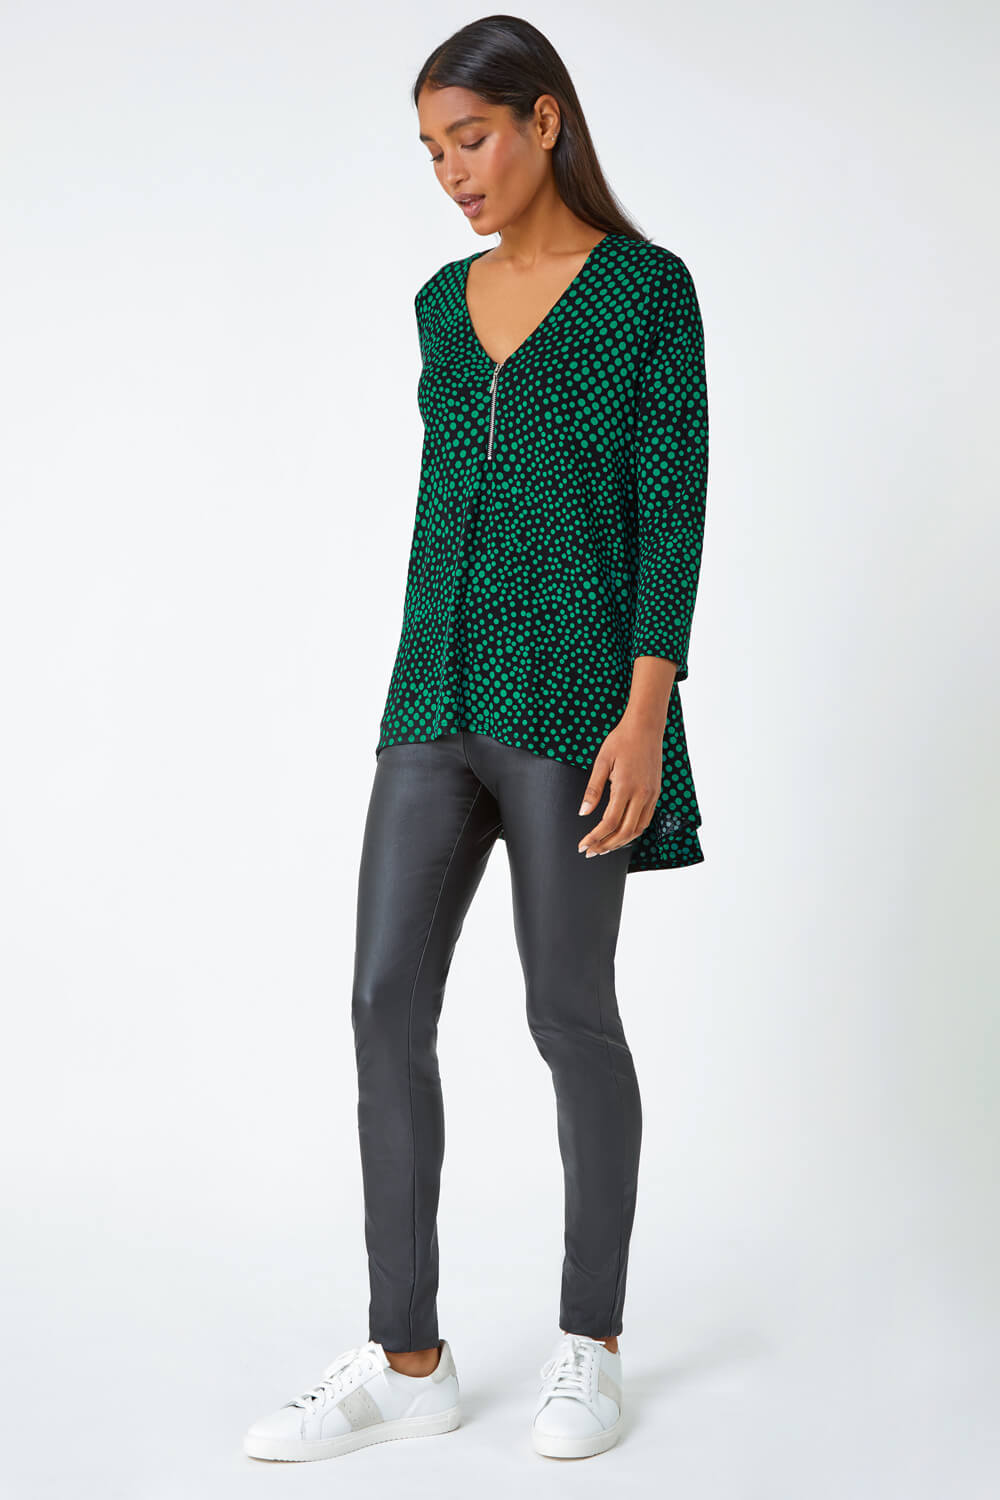 Green Spot Print Zip Front Stretch Top, Image 2 of 5